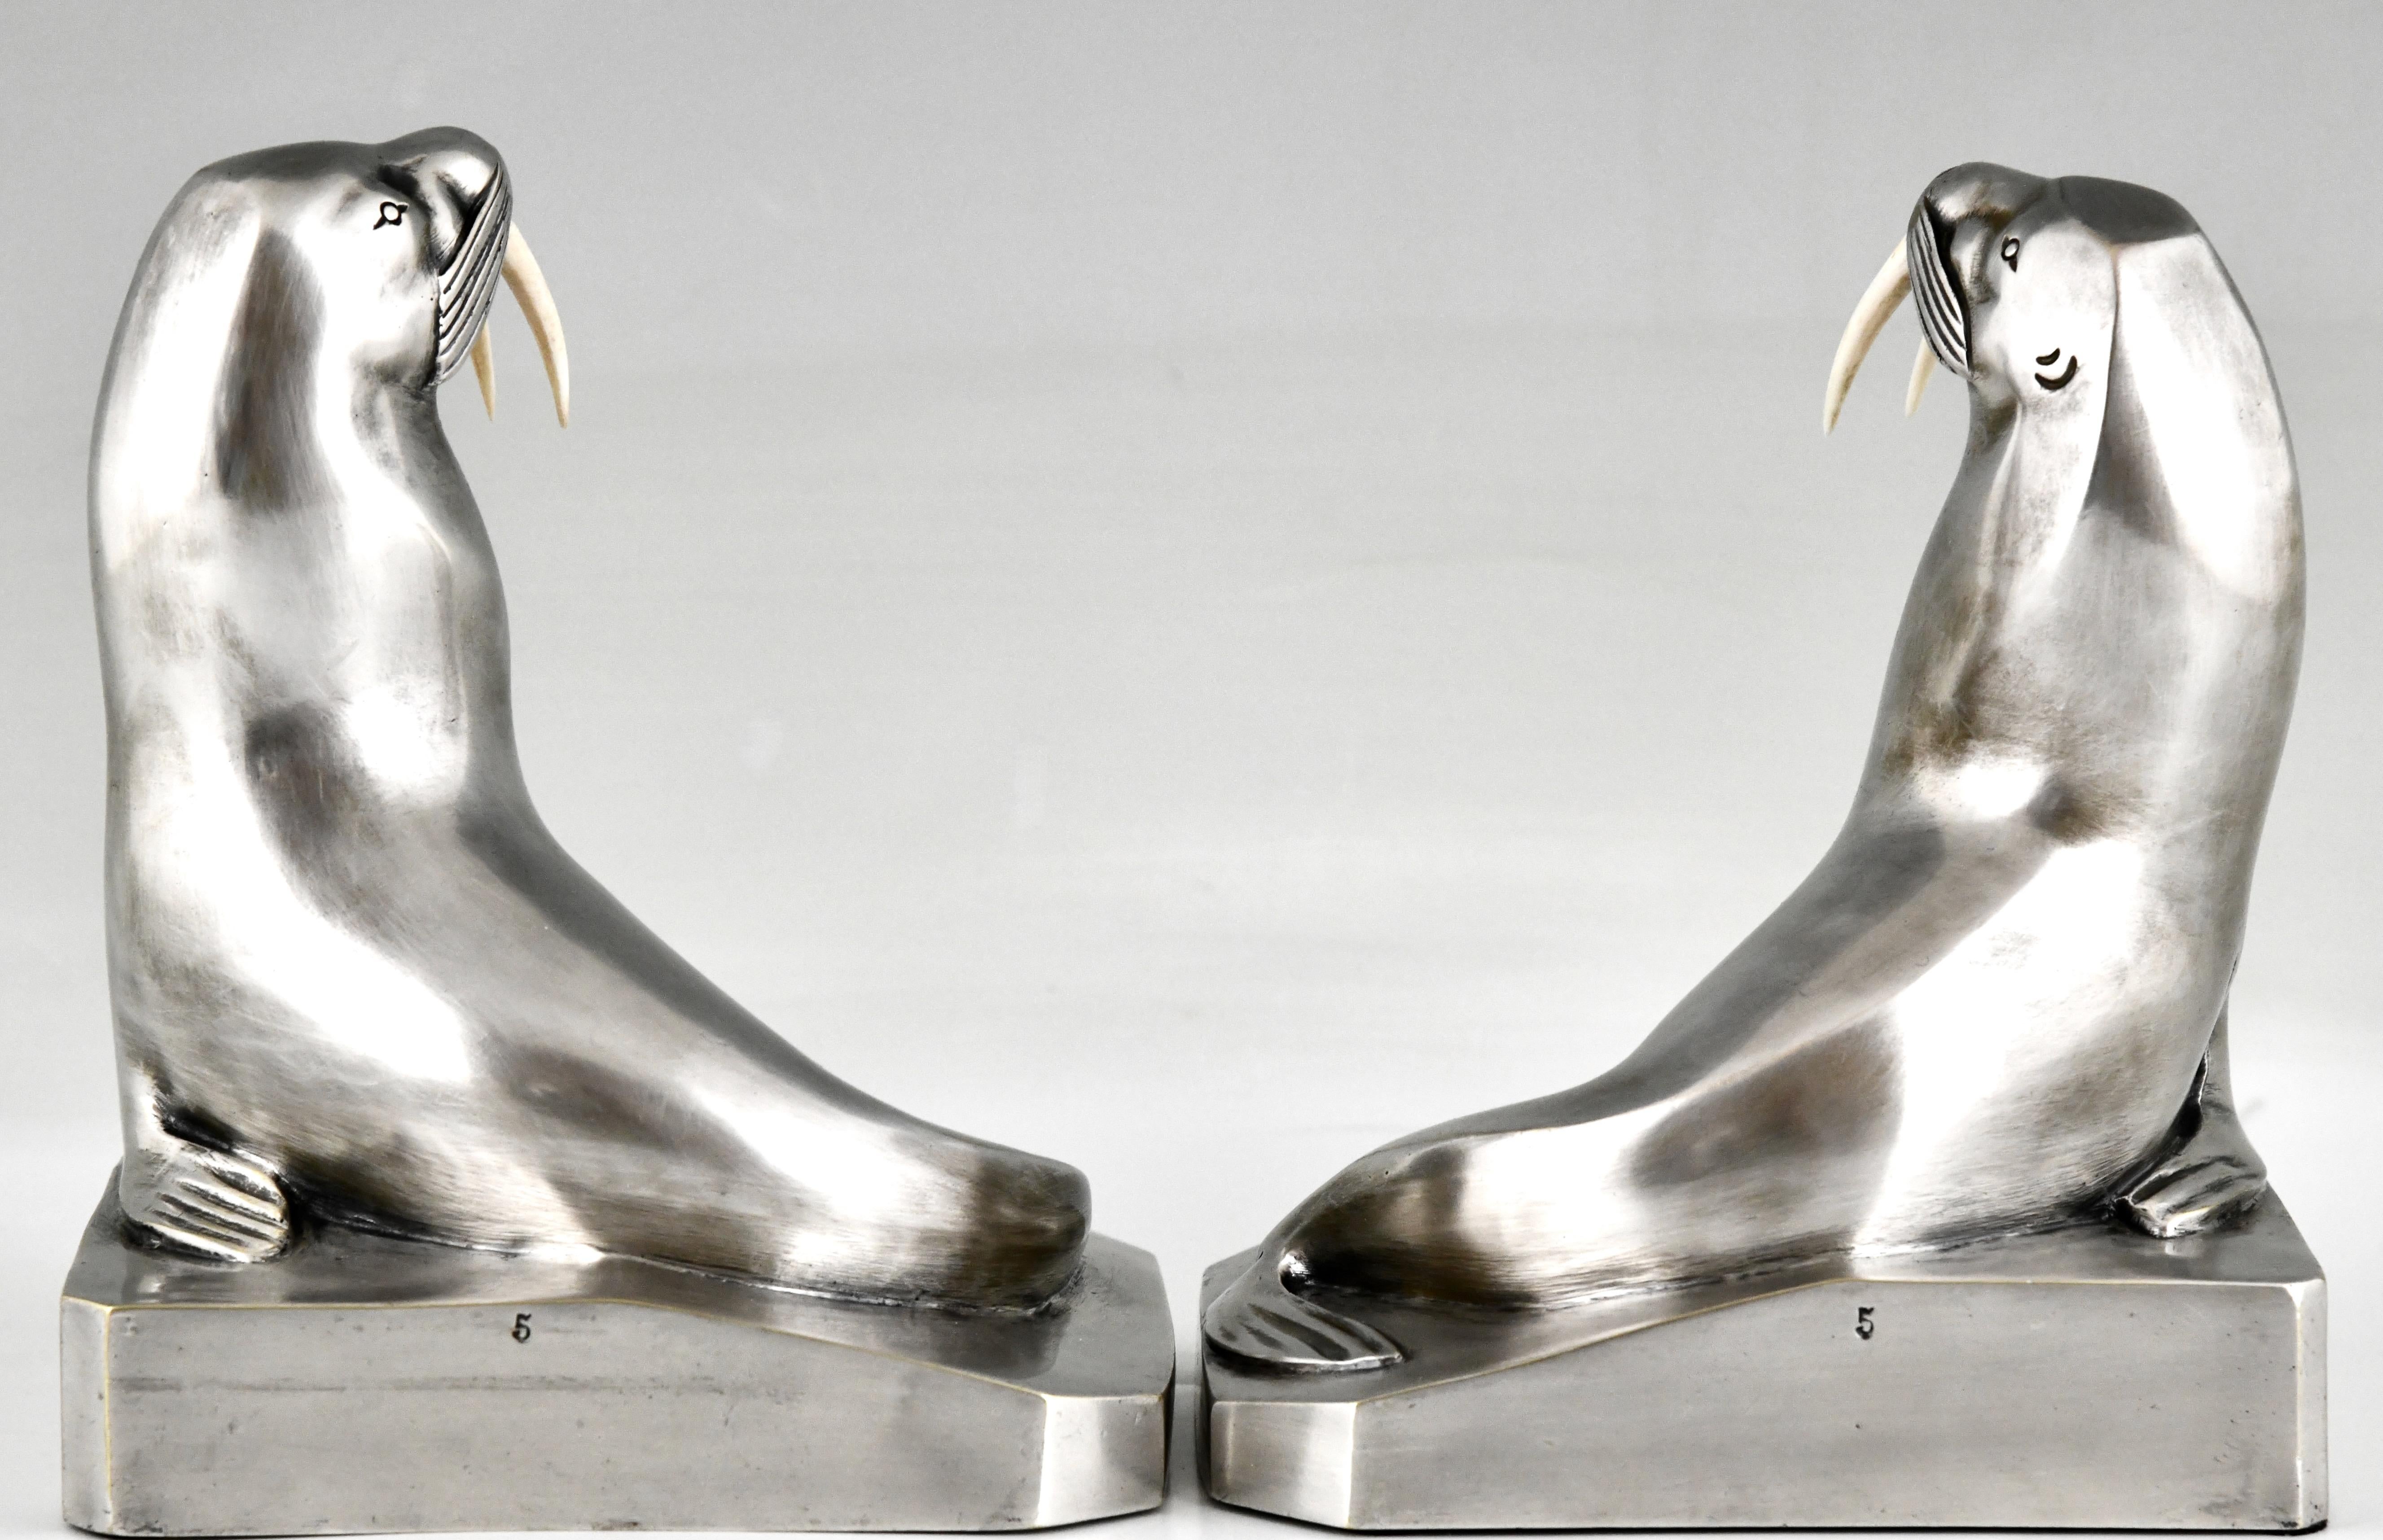 Art Deco silvered bronze walrus bookends signed by by G.H. Laurent.
Numbered, France 1925
This pair is illustrated in 2 books:
Art Deco and other figures by Brian Catley &
Statuettes of the Art Deco Period by Alberto Shayo.